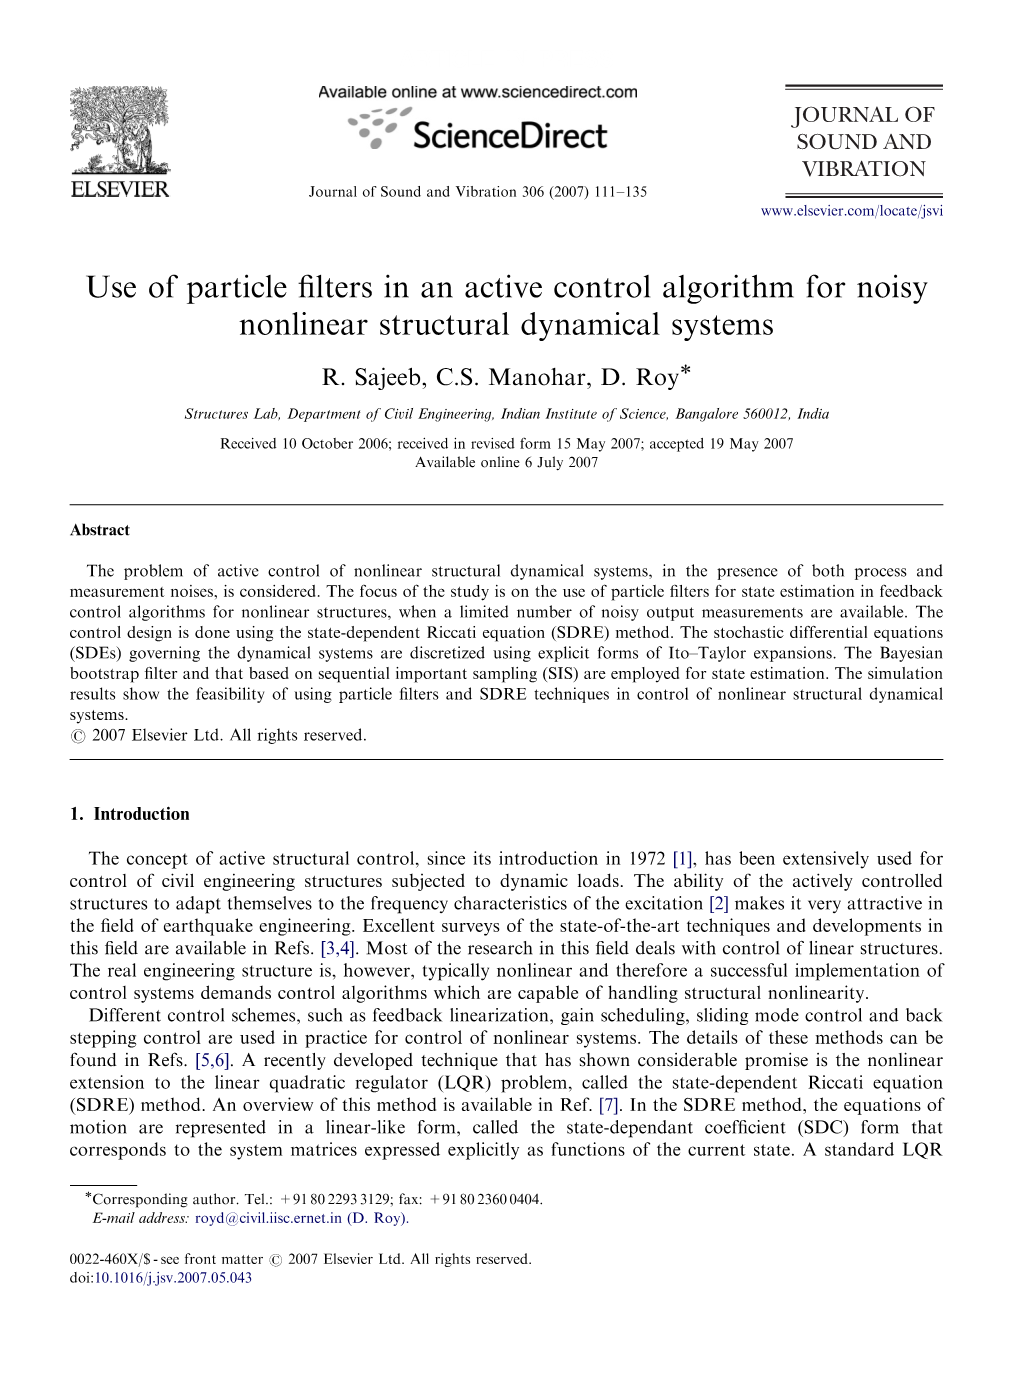 Use of Particle Filters in an Active Control Algorithm for Noisy Nonlinear